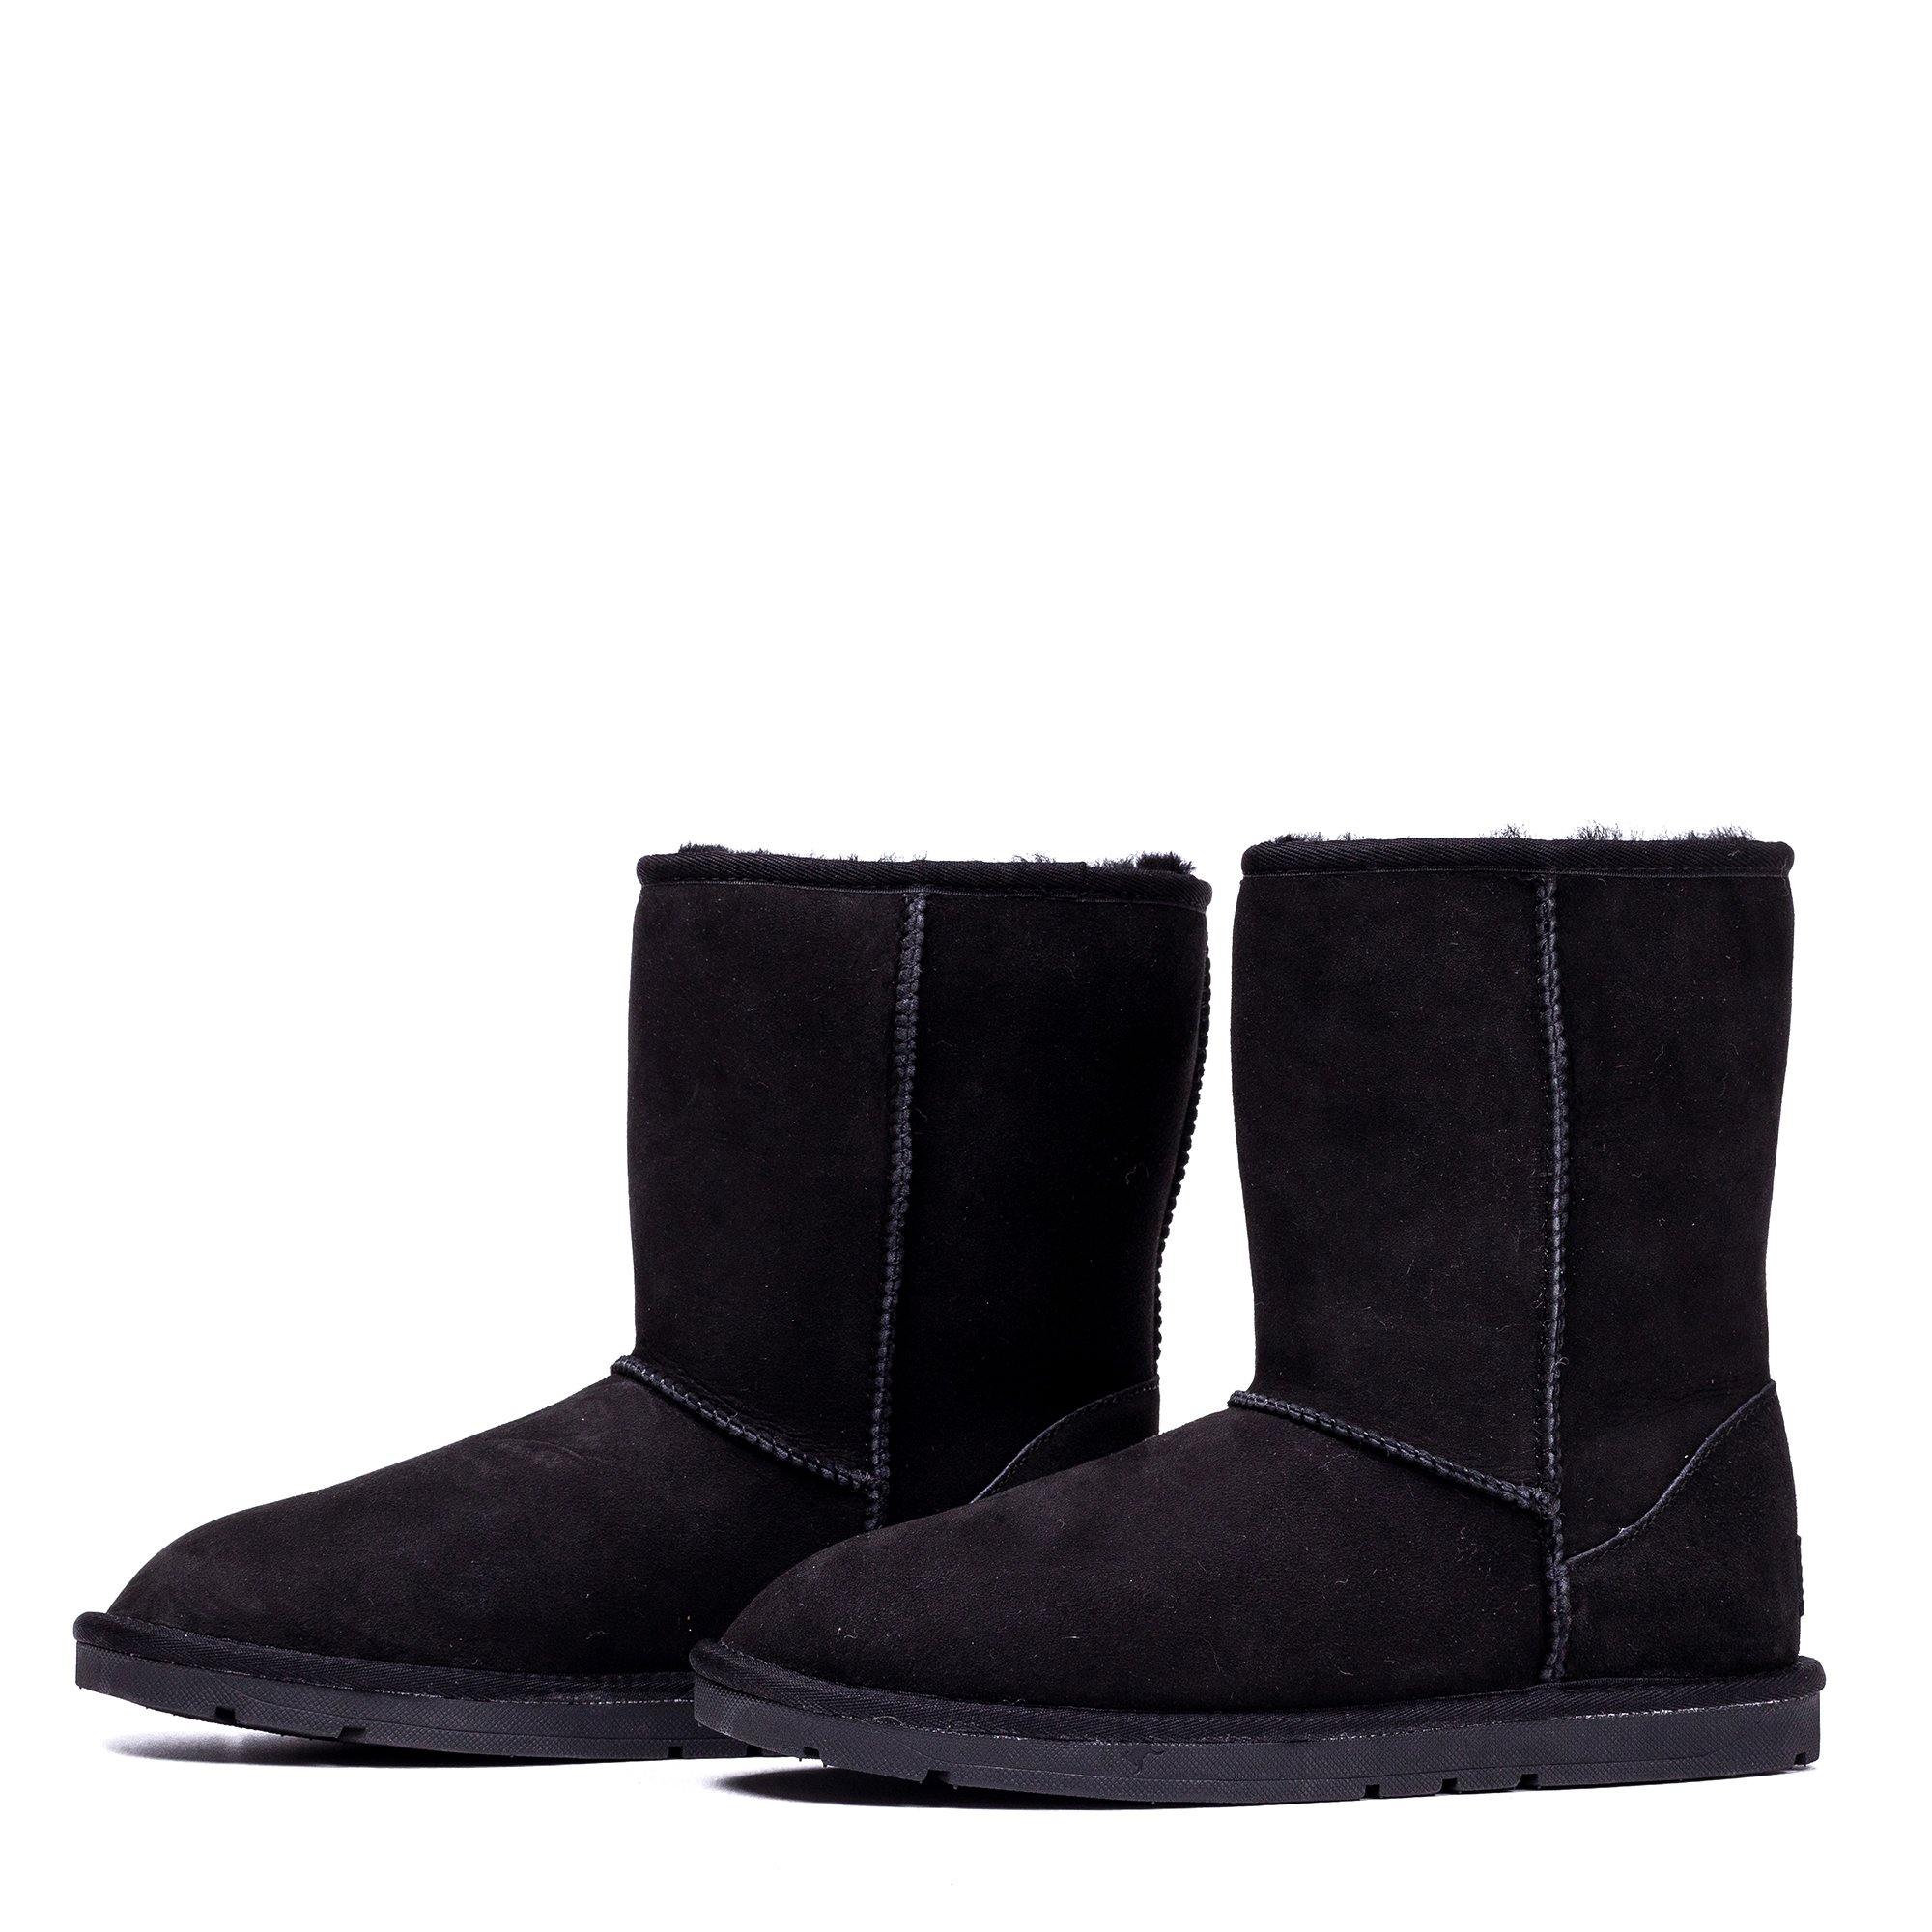 UGG Roozee Short Classic Boots